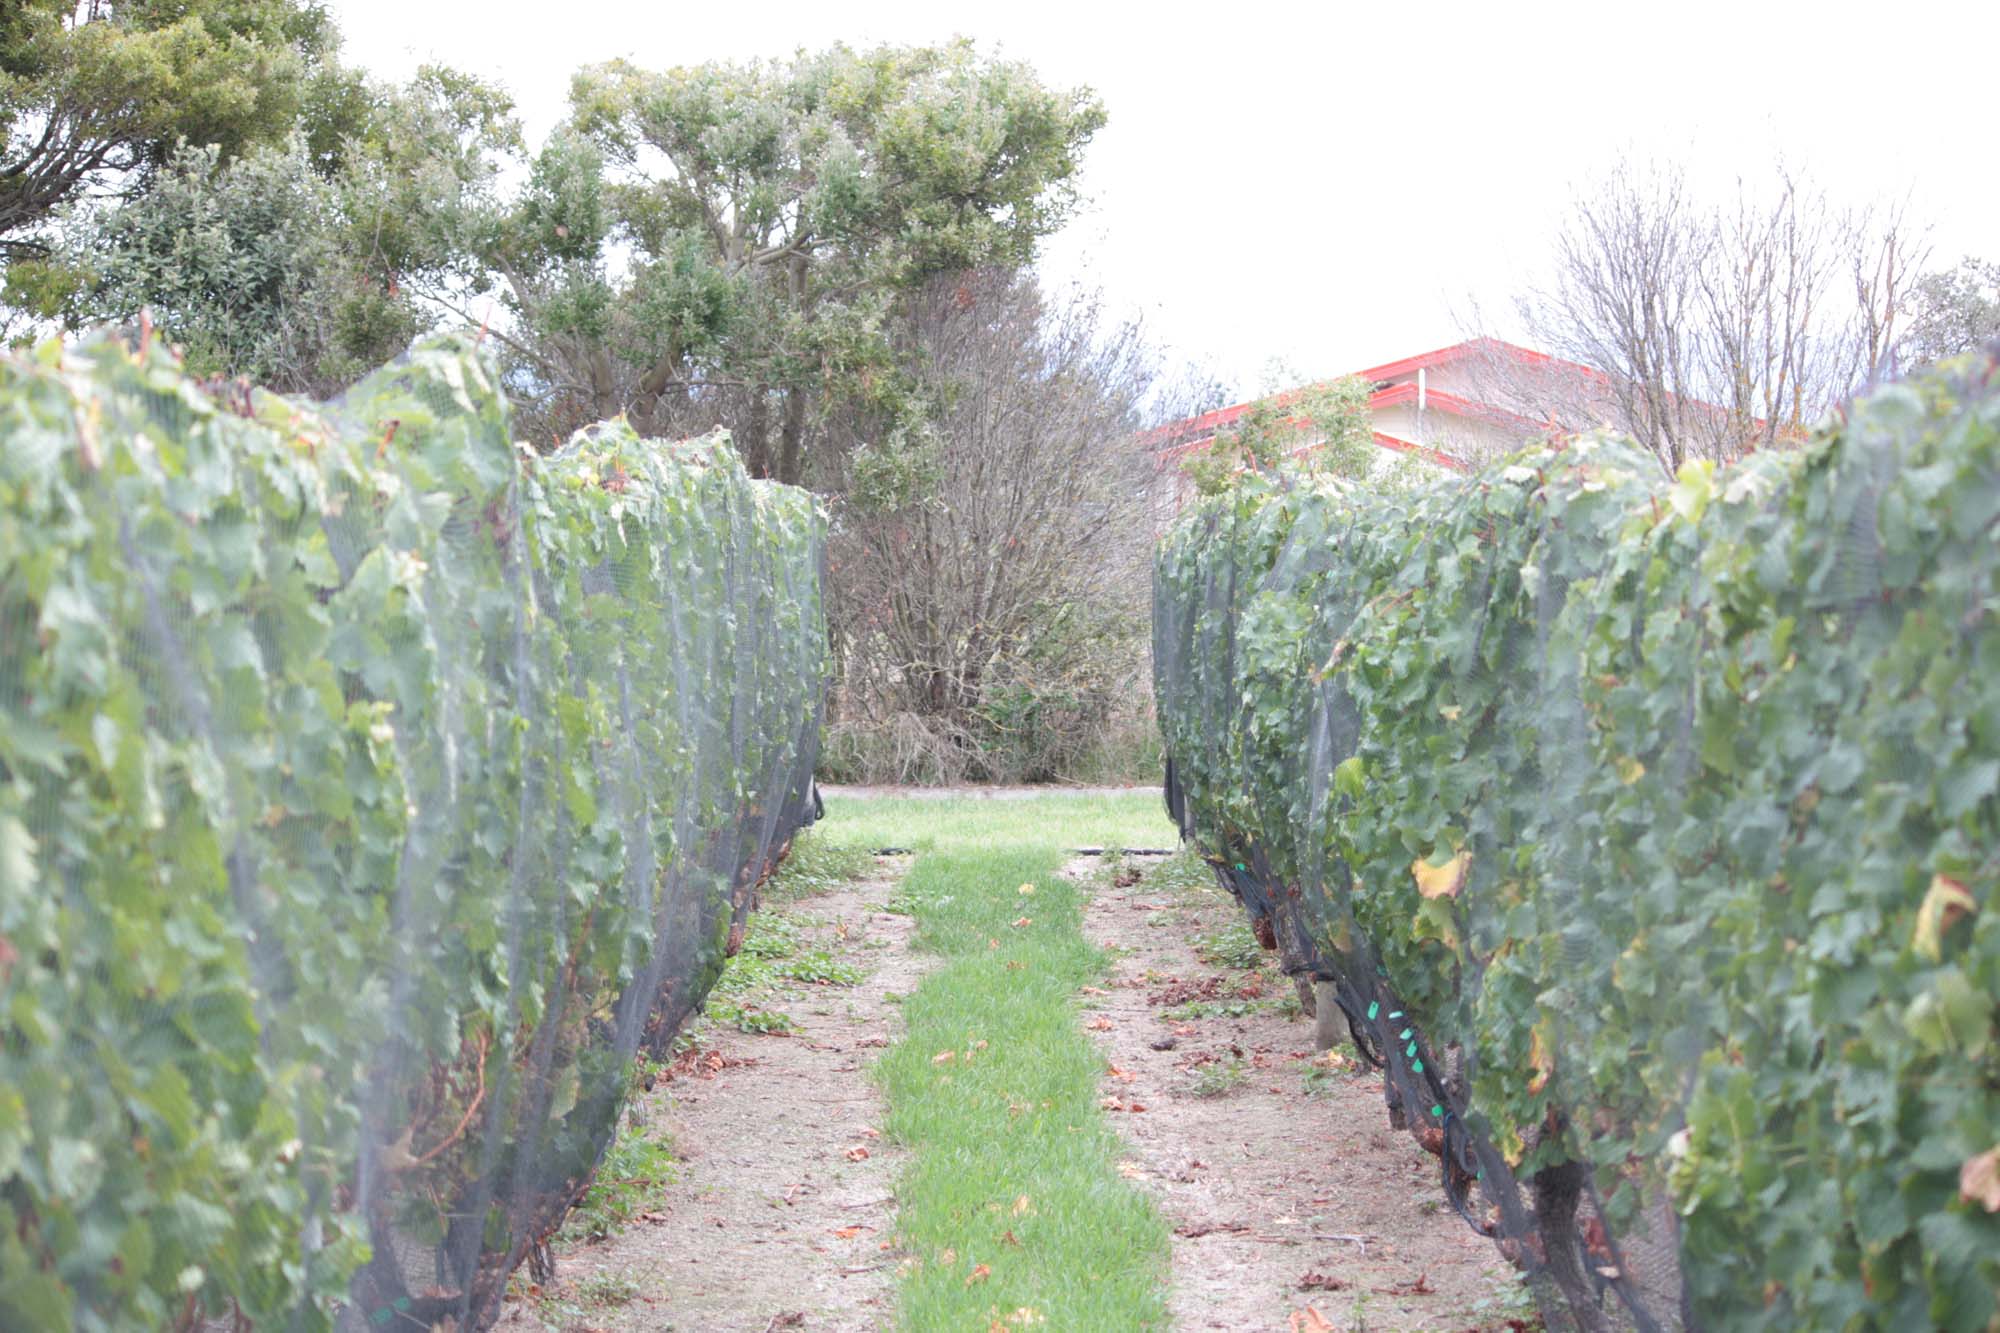 Sauvignon Blanc Grapes ready for picking and making into wine, Martinborough, 26 Rows